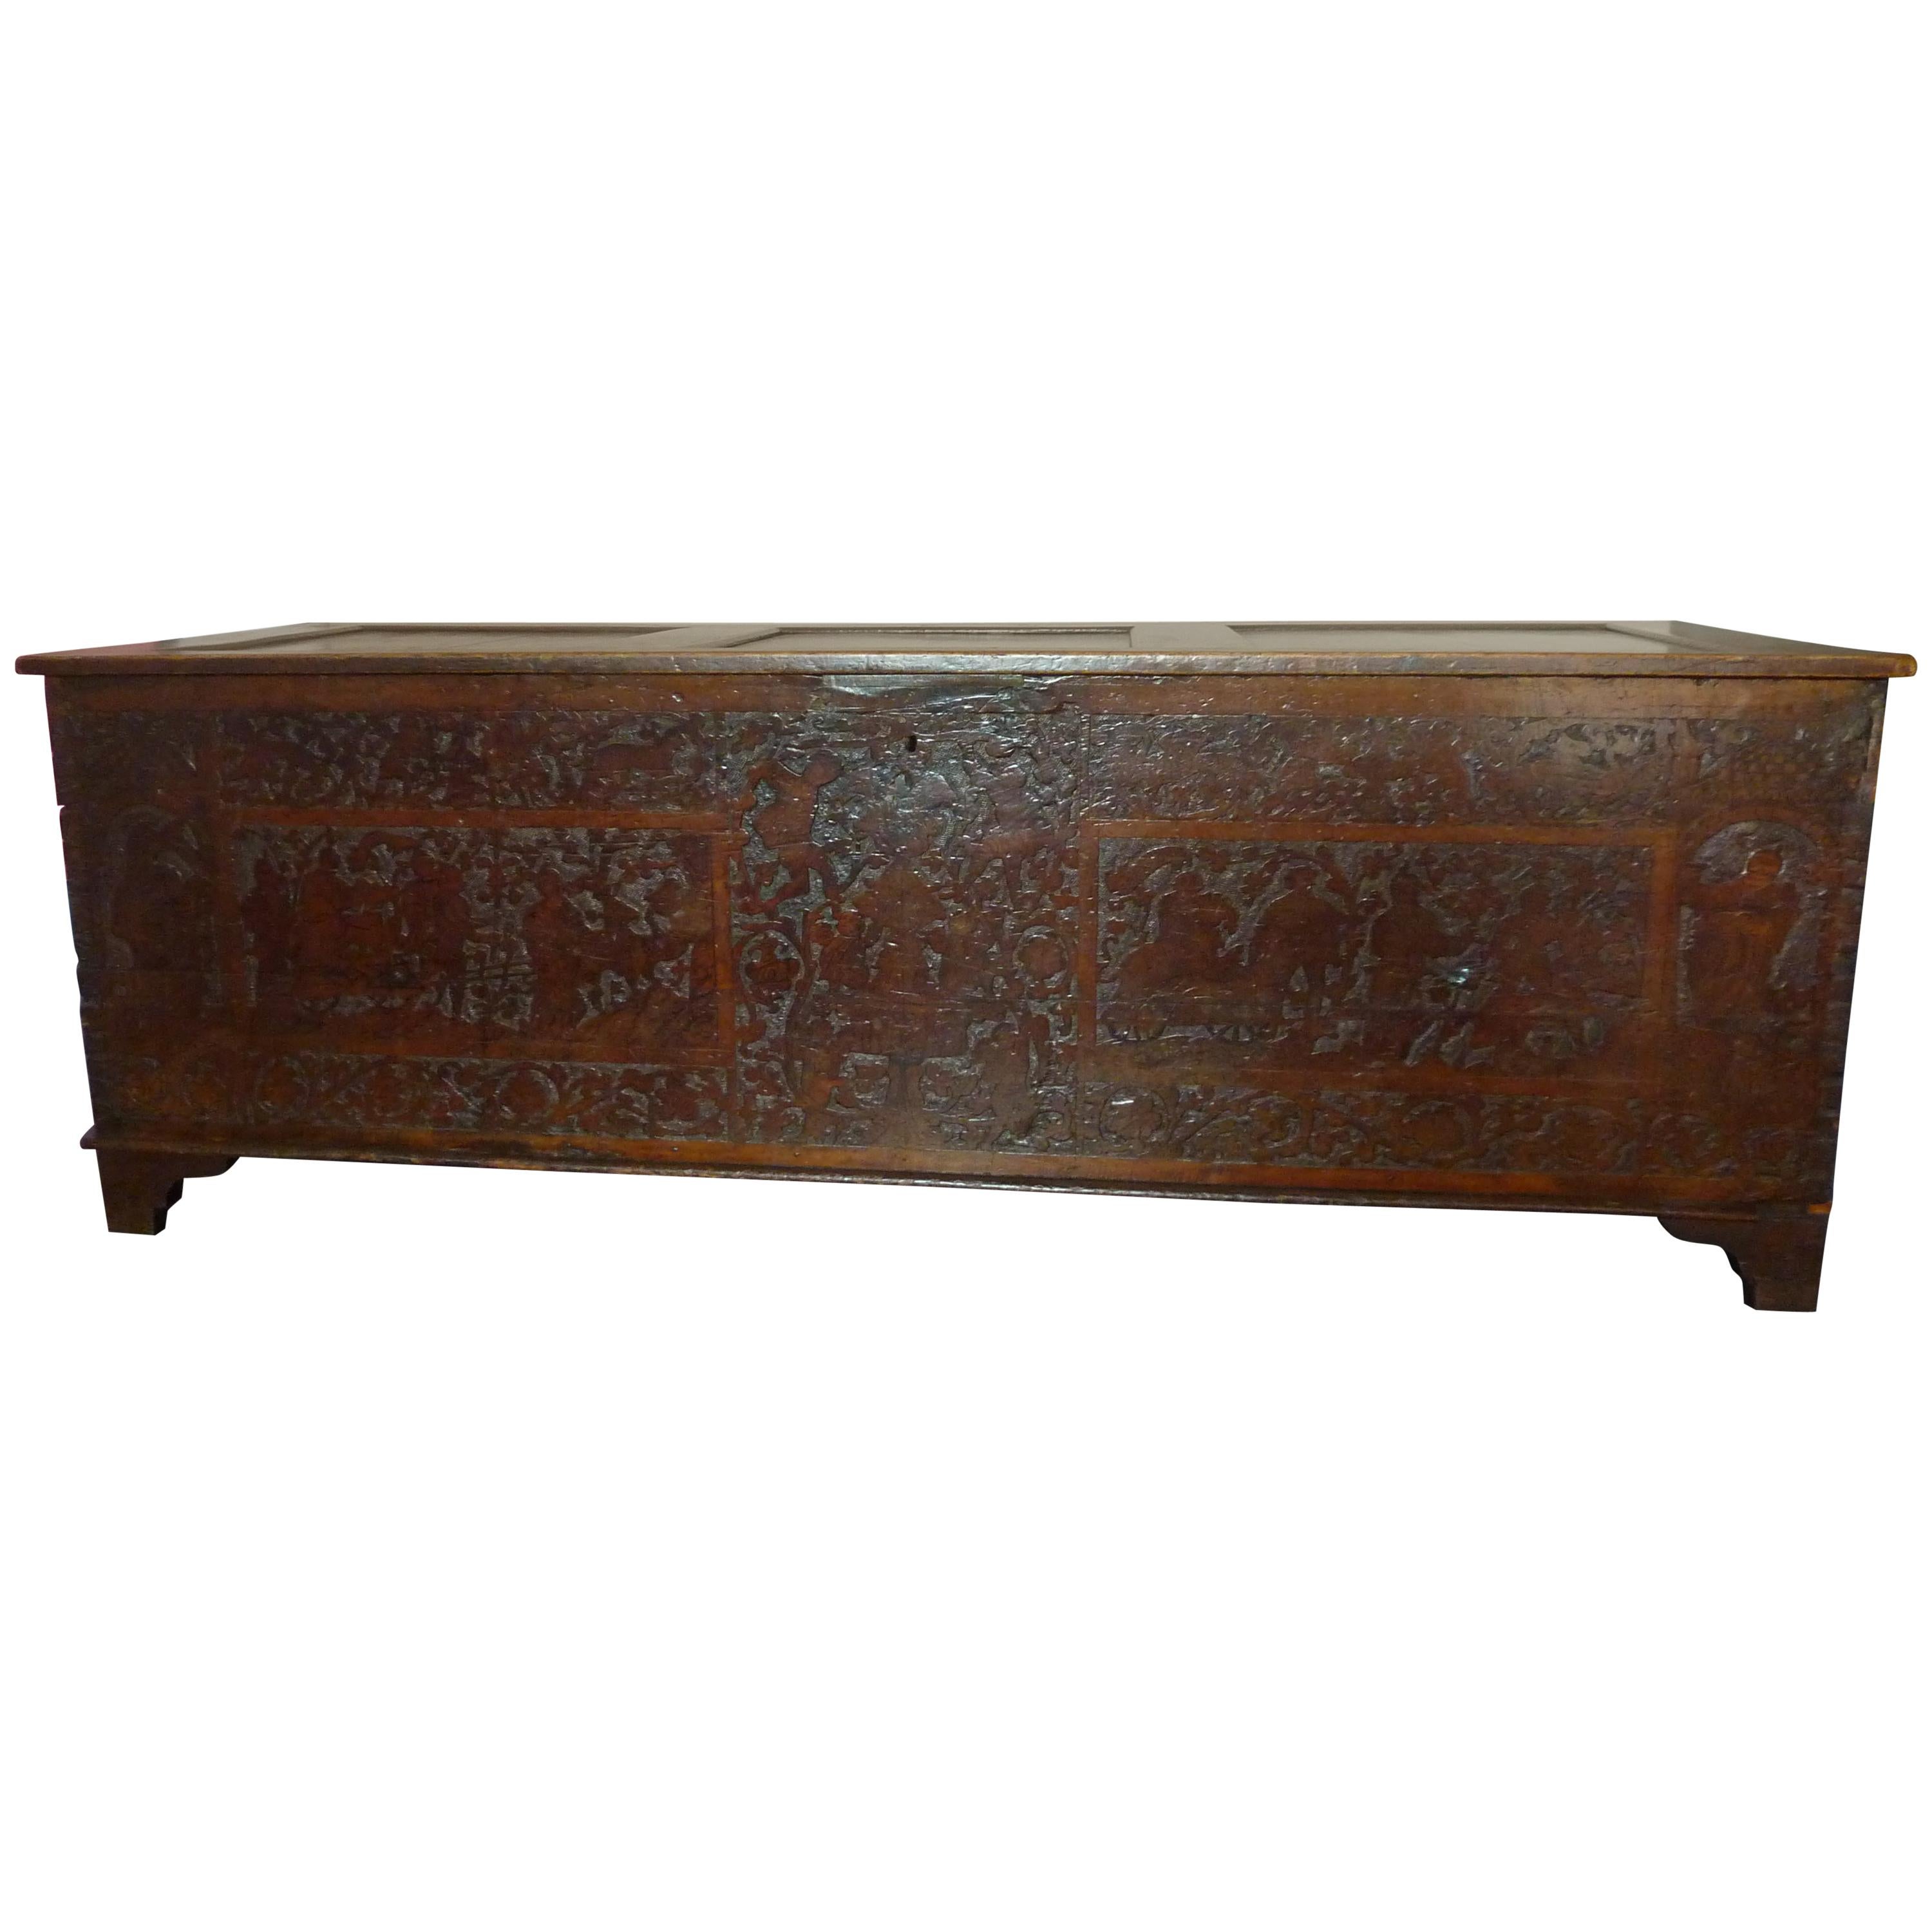 North Italian Late 16th-Early 17th Century Chest For Sale